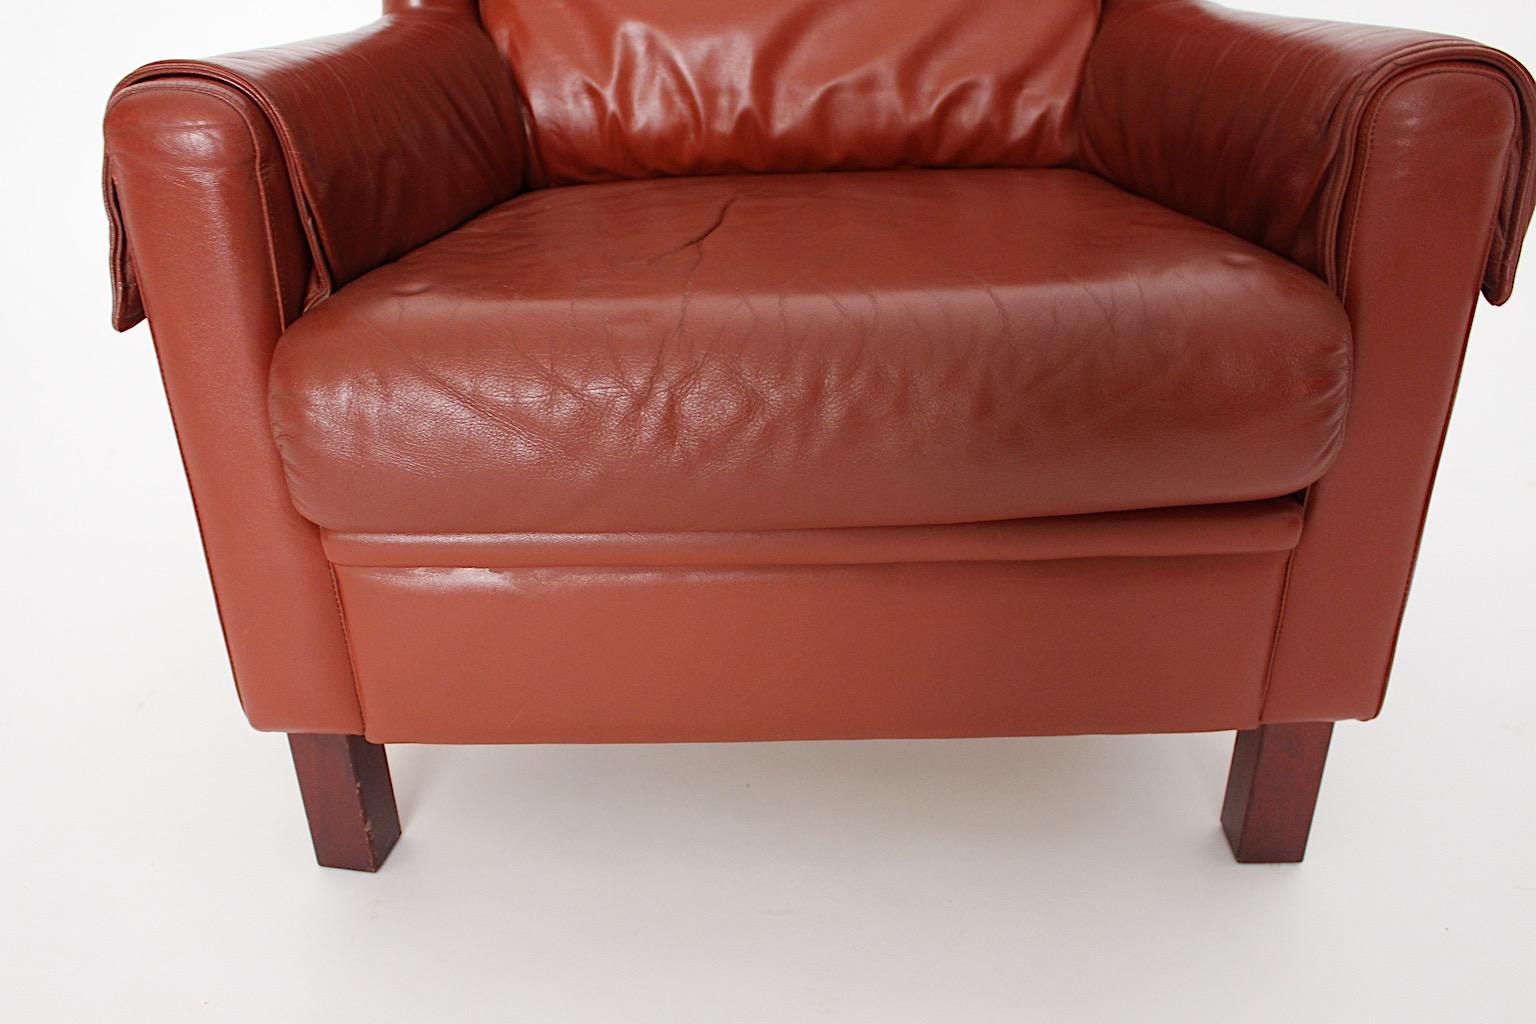 Leather Reddish Brown Vintage Wingback Chair Lounge Chair 1970s Austria For Sale 13